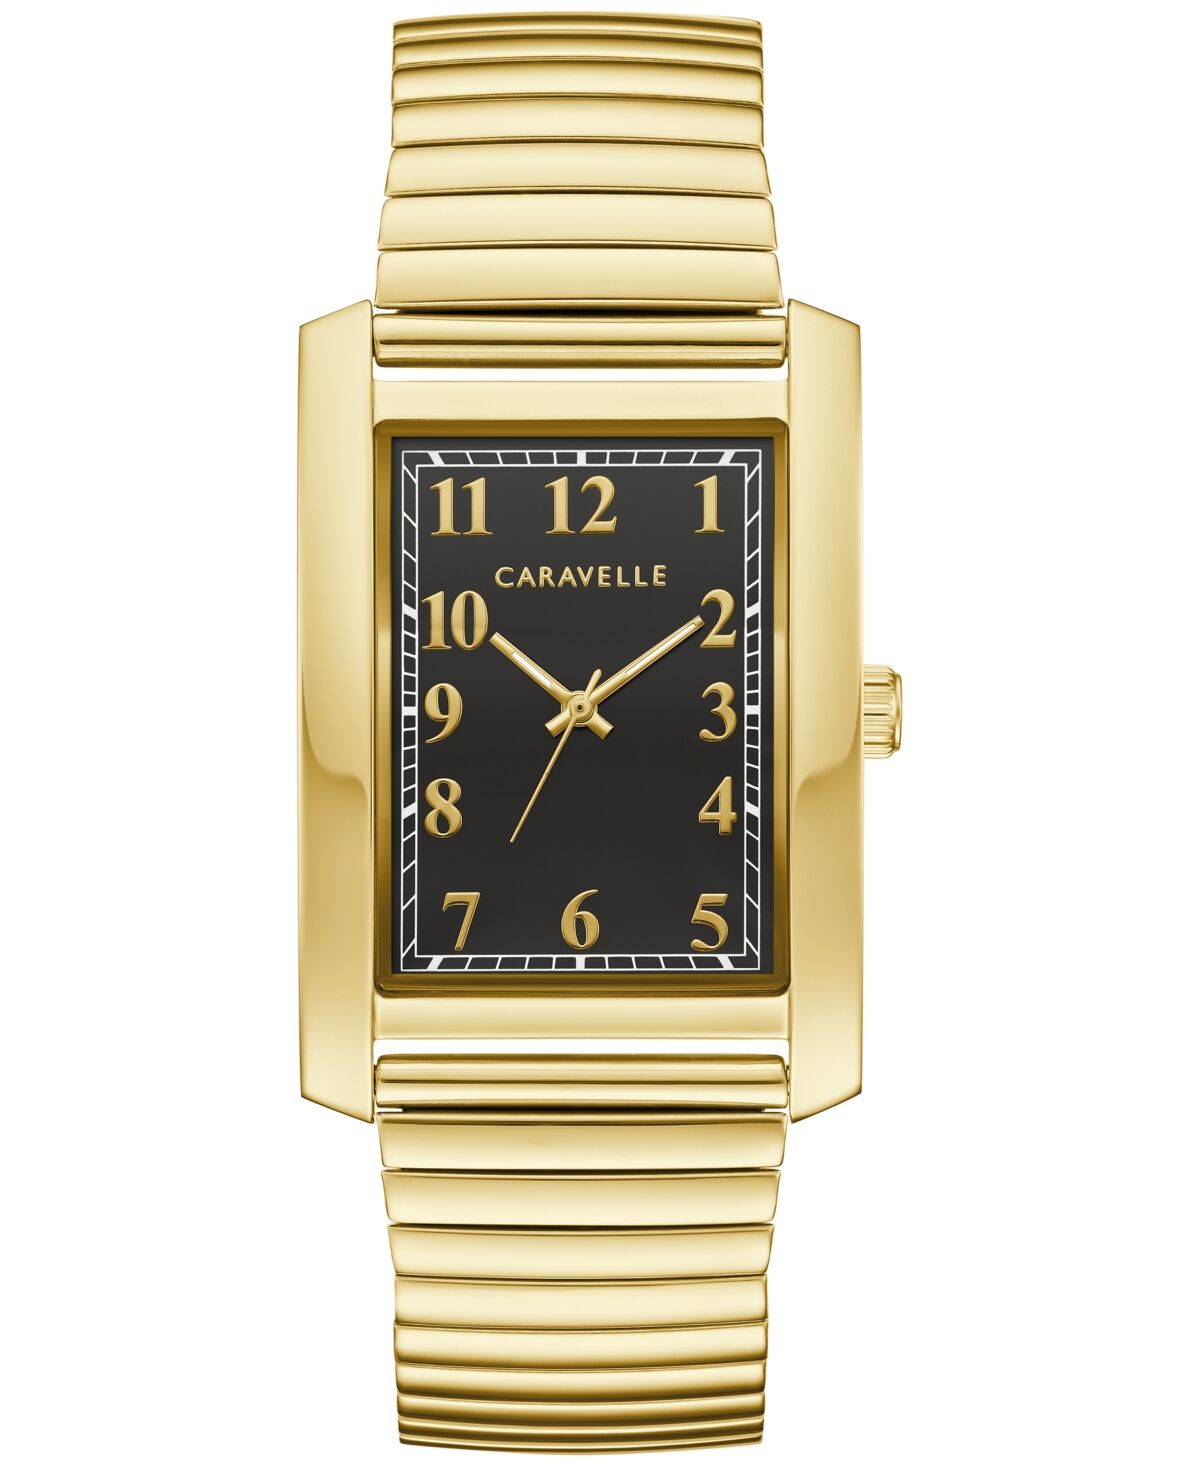 Caravelle designed by Bulova Men's Dress Gold-Tone Stainless Steel Expansion Bracelet Watch 30mm - Gold-tone